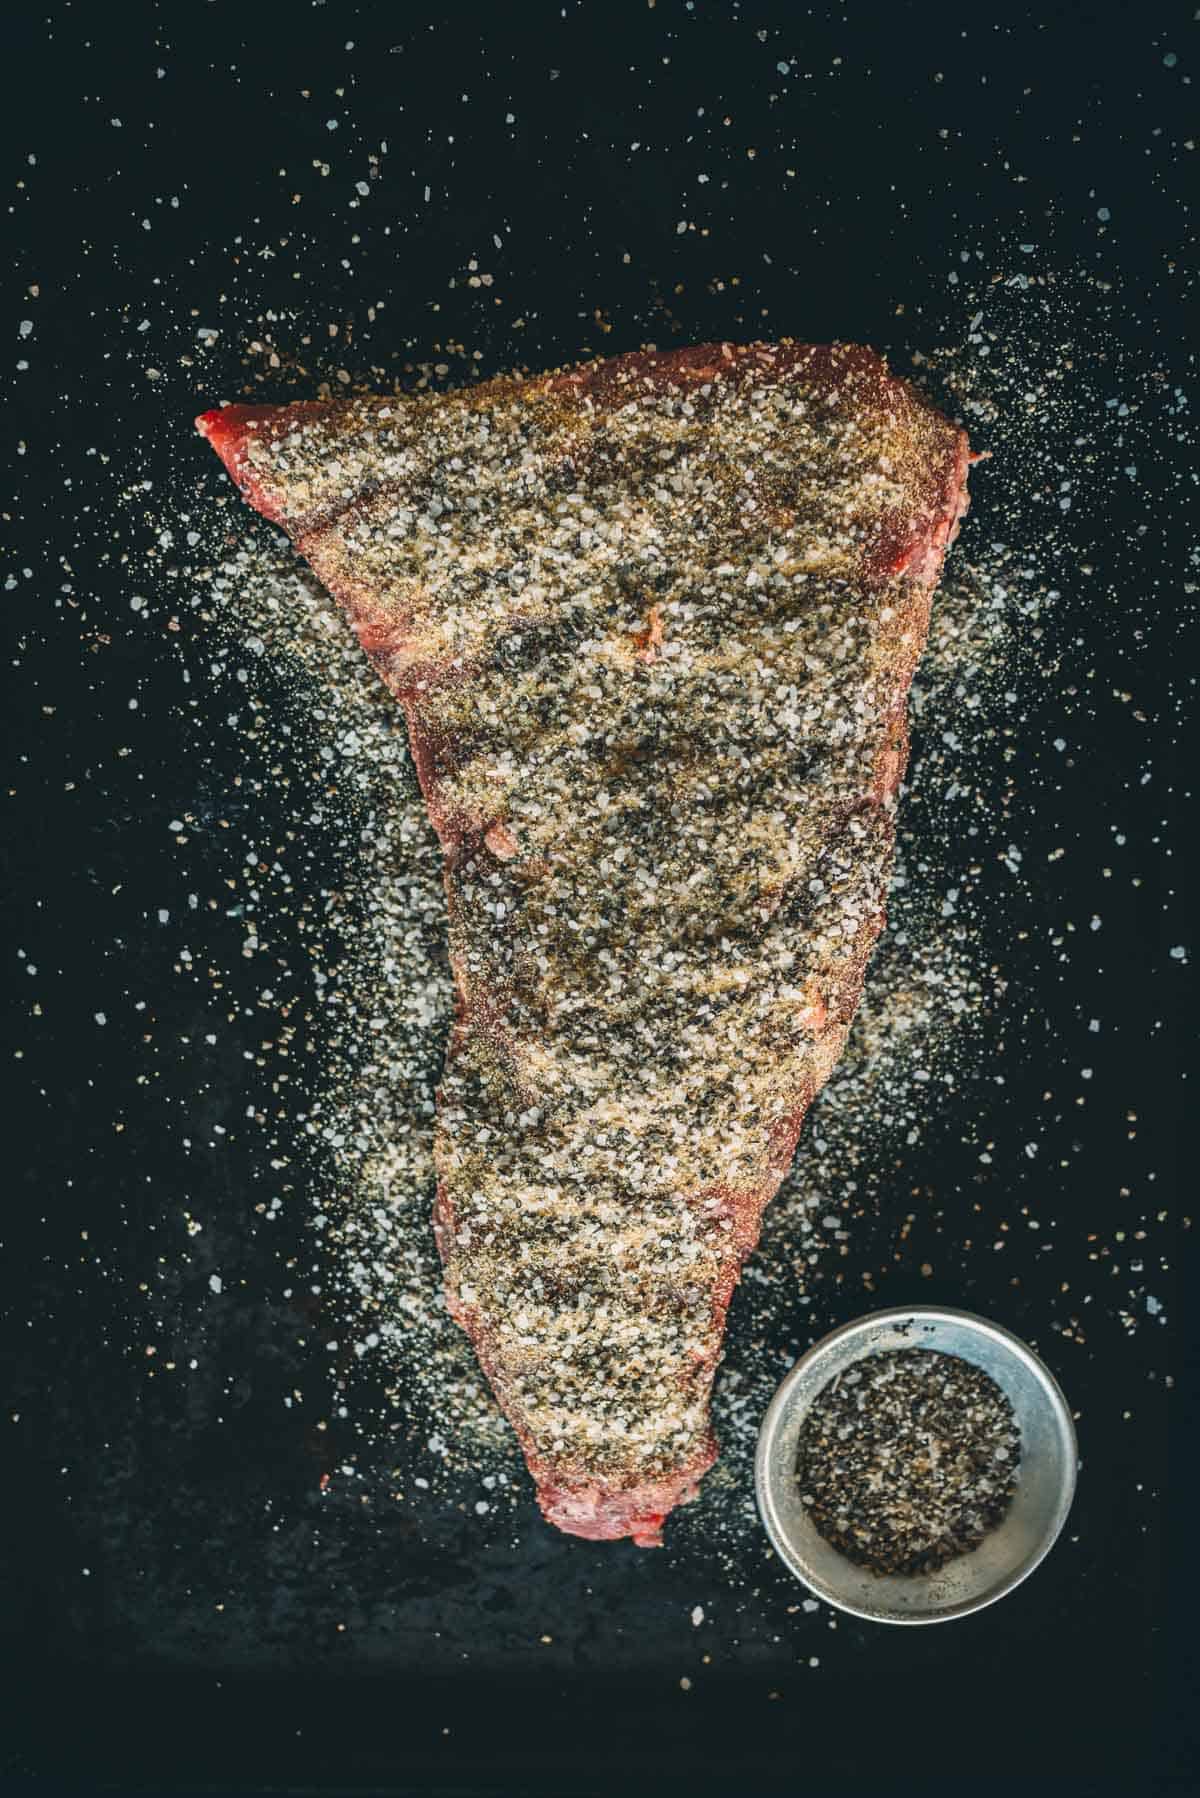 A tri-tip seasoned with spices lies on a dark surface next to a small bowl containing additional seasoning.